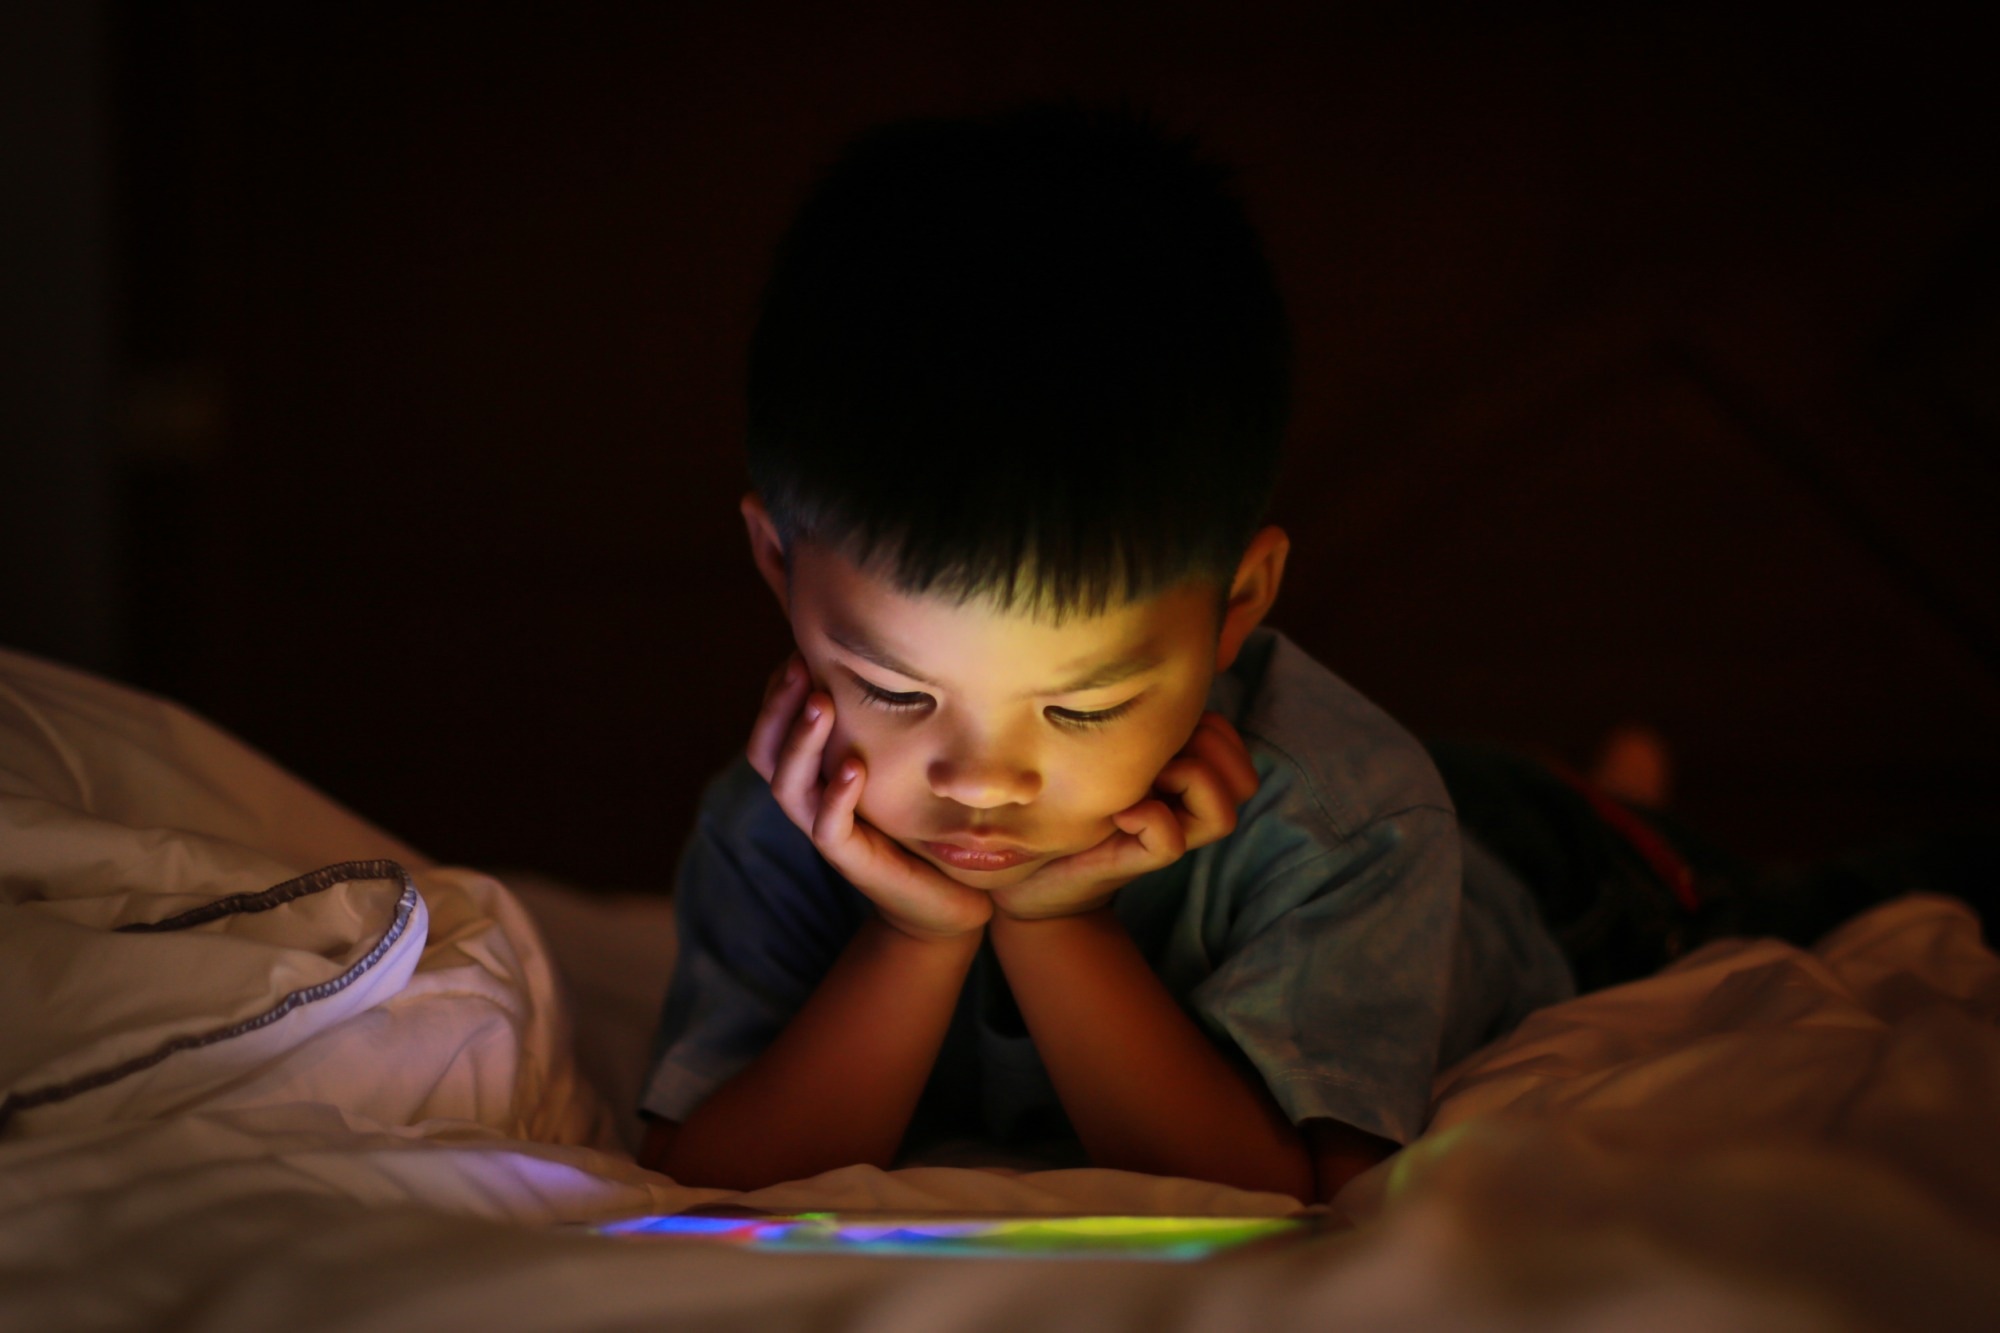 Study: Changes in Children’s Recreational Screen Time During the COVID-19 Pandemic. Image Credit: vinnstock / Shutterstock